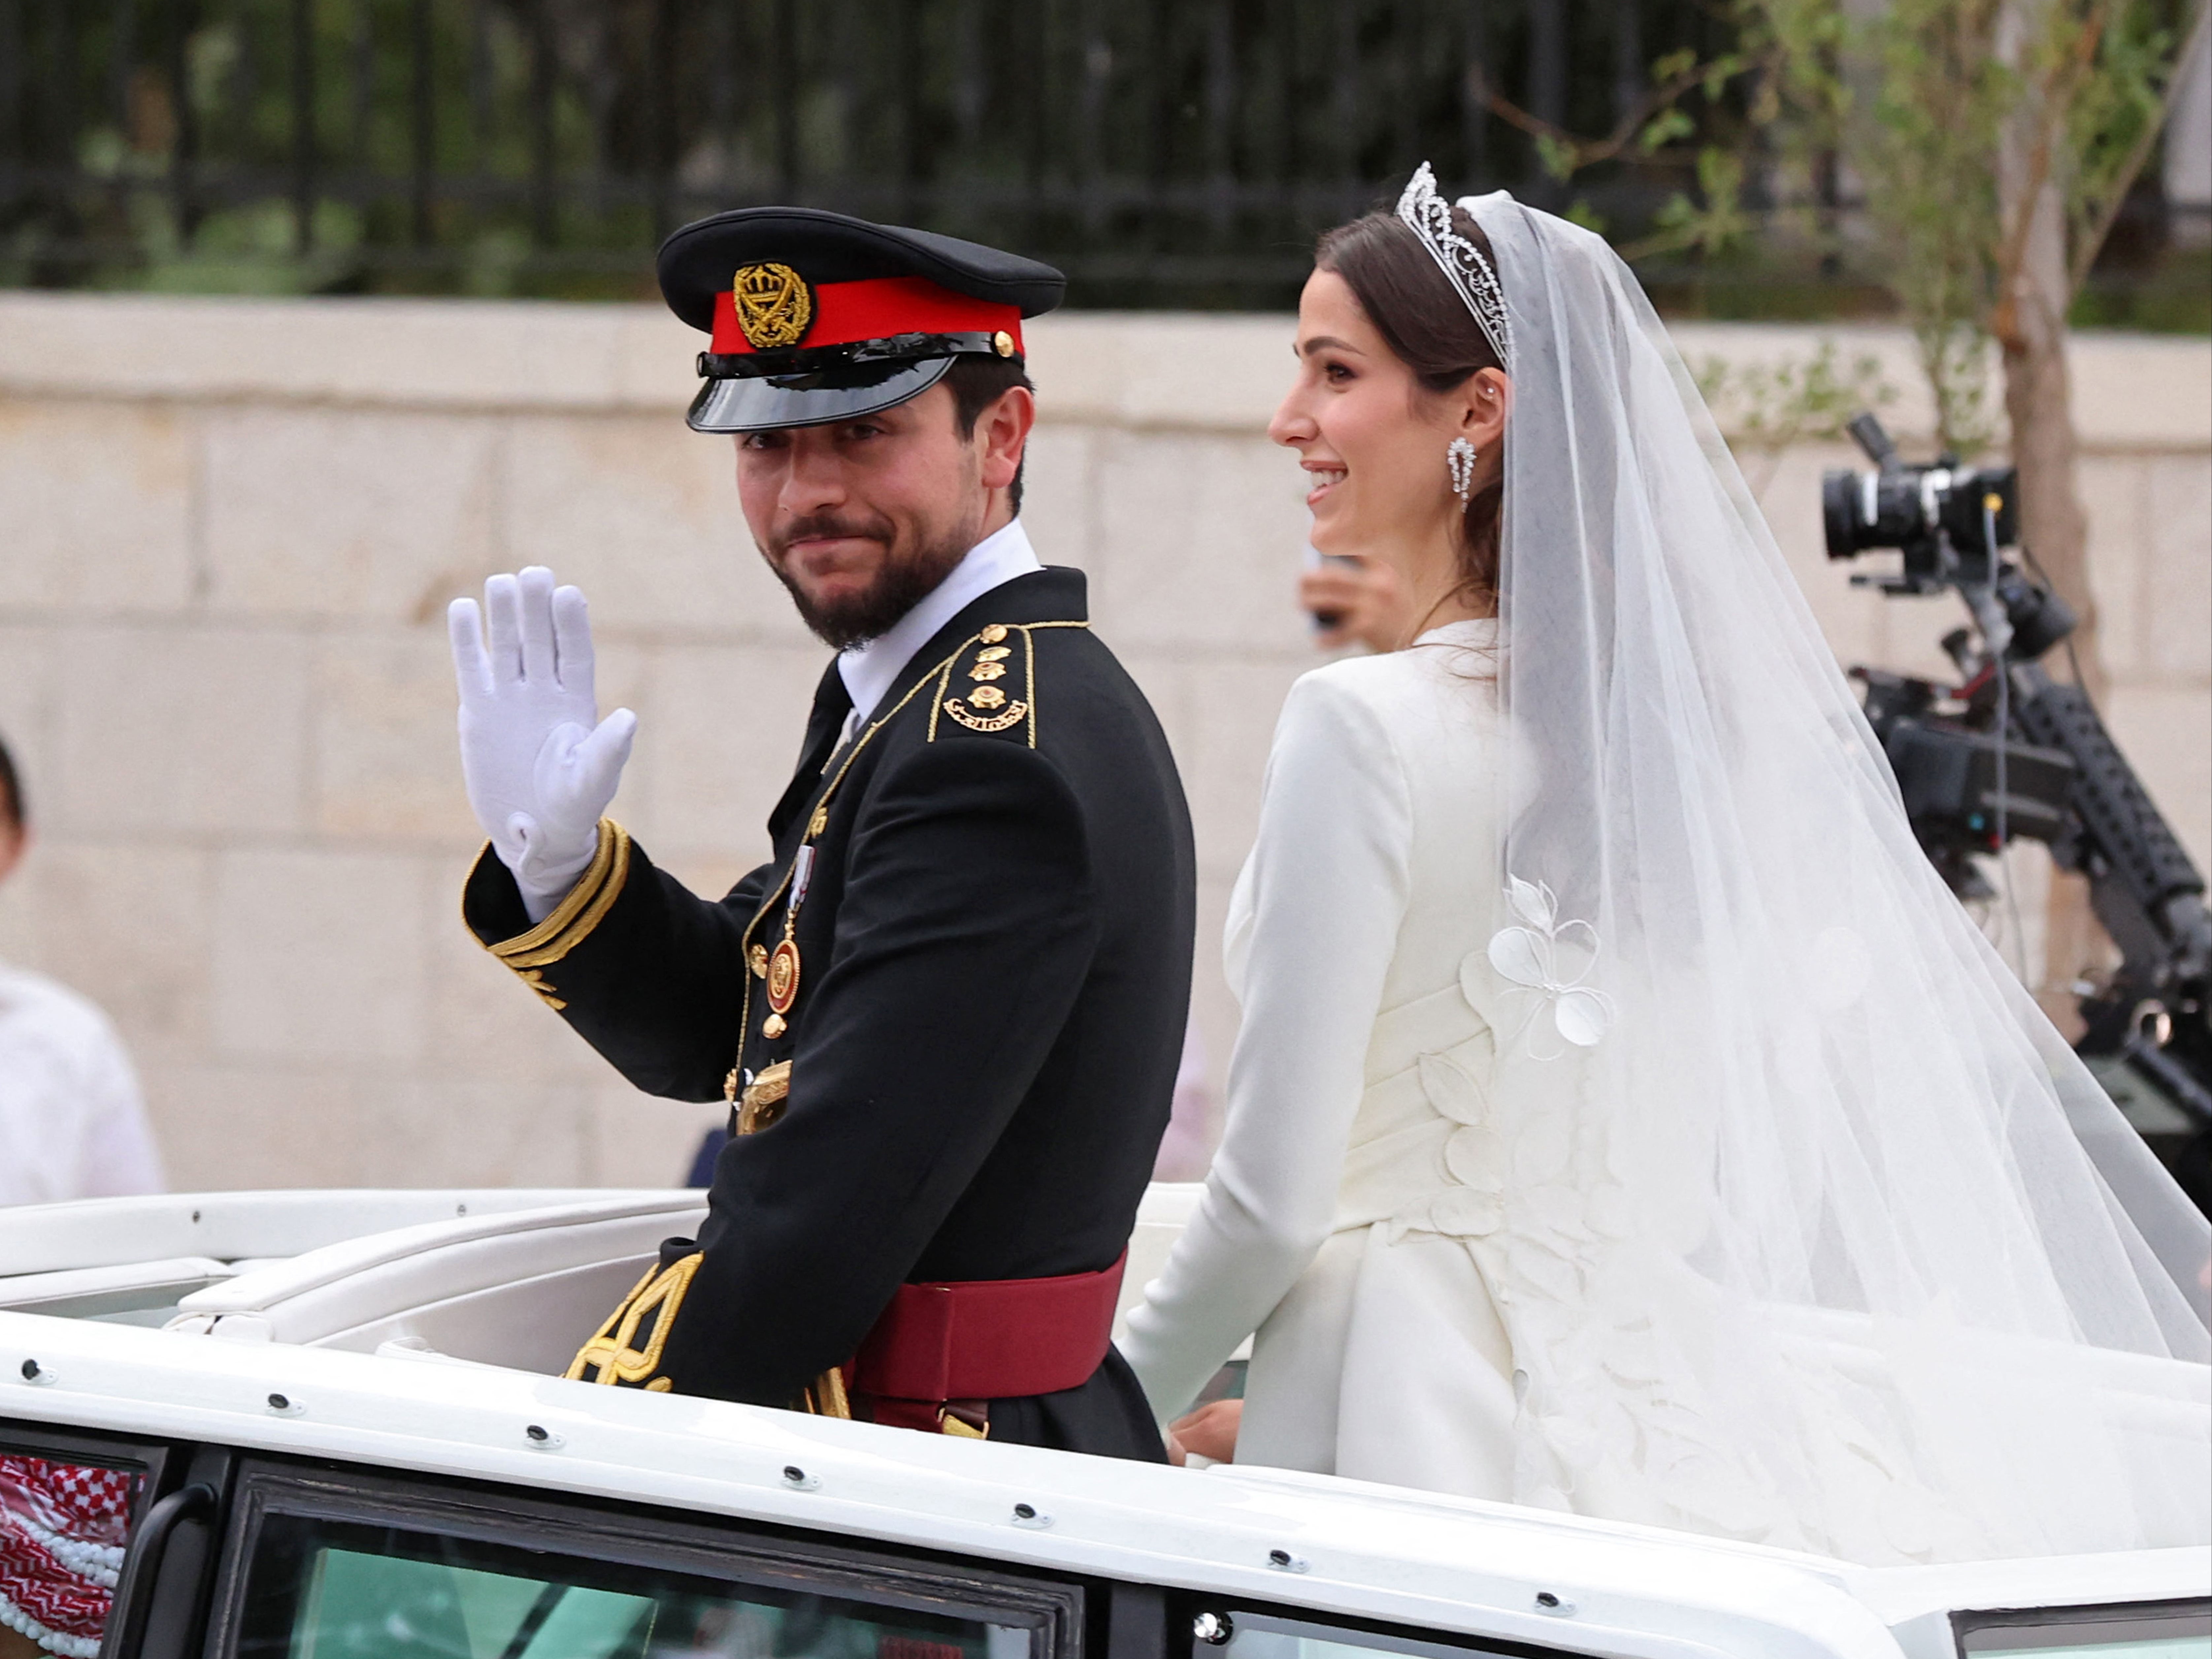 Jordan royal wedding All we know about the marriage of Crown Prince Everything Al Hussein The Independent